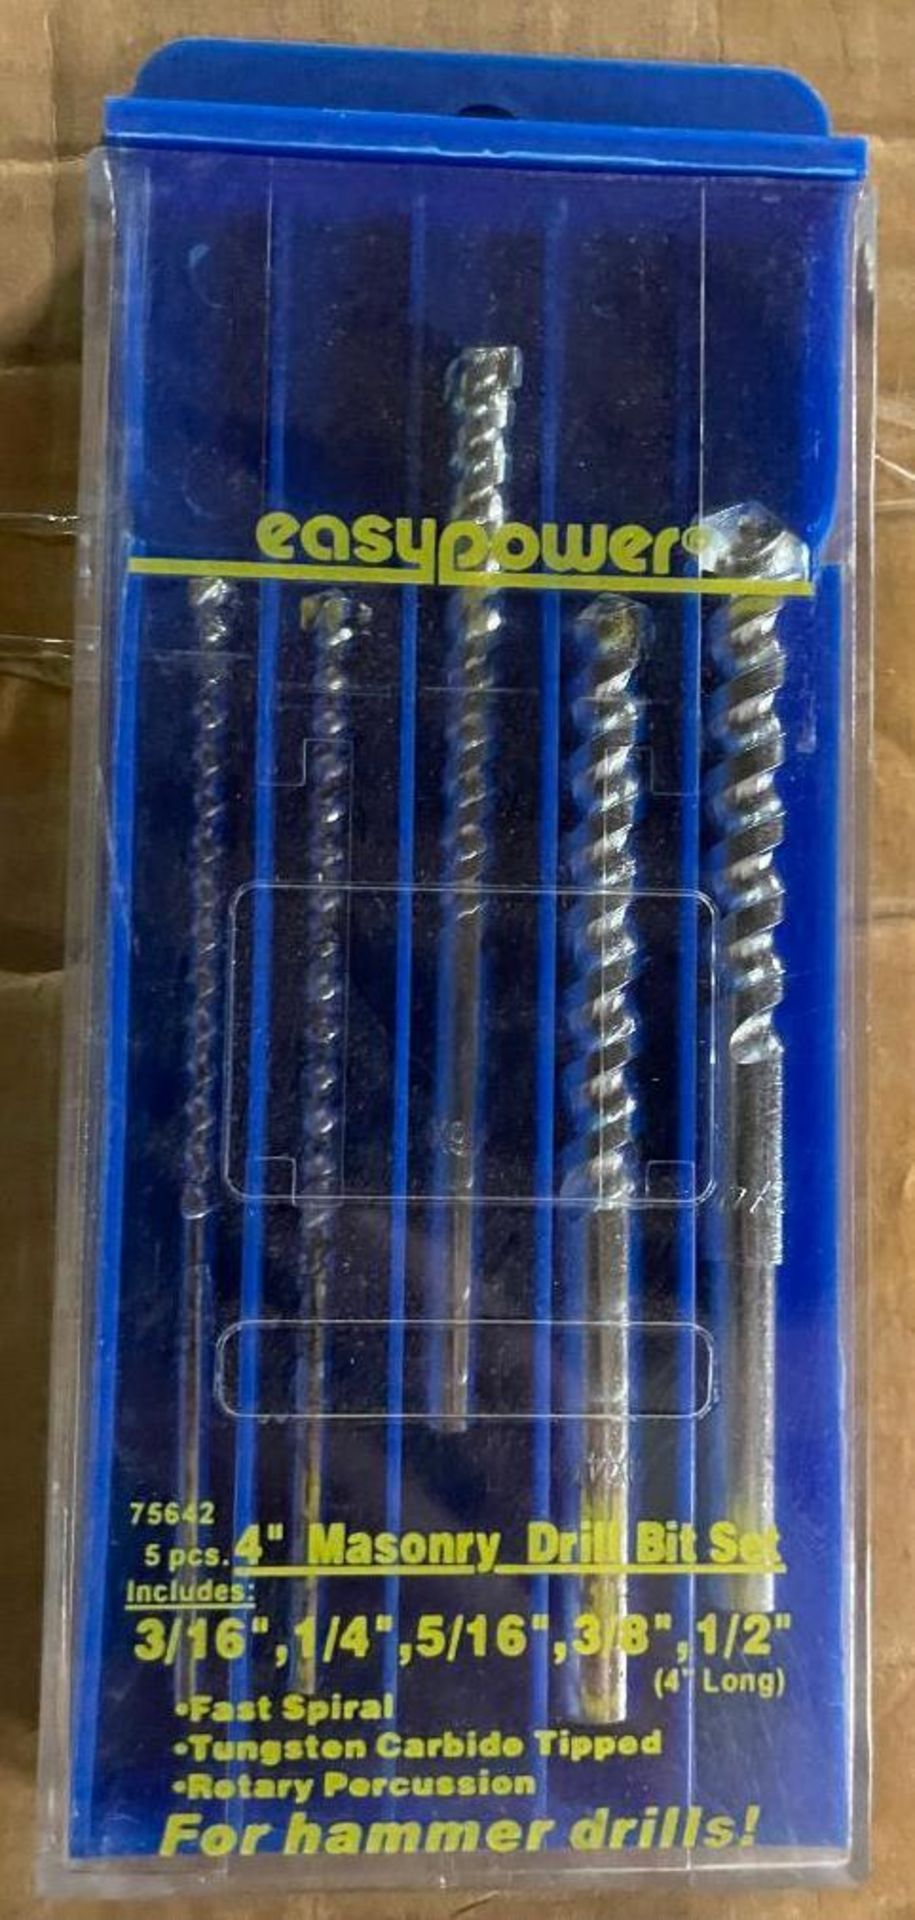 DESCRIPTION: (500) 5CT PACKS OF 4" ASSORTED SIZED MASONRY DRILL BIT SETS BRAND/MODEL: EAZYPOWER 7564